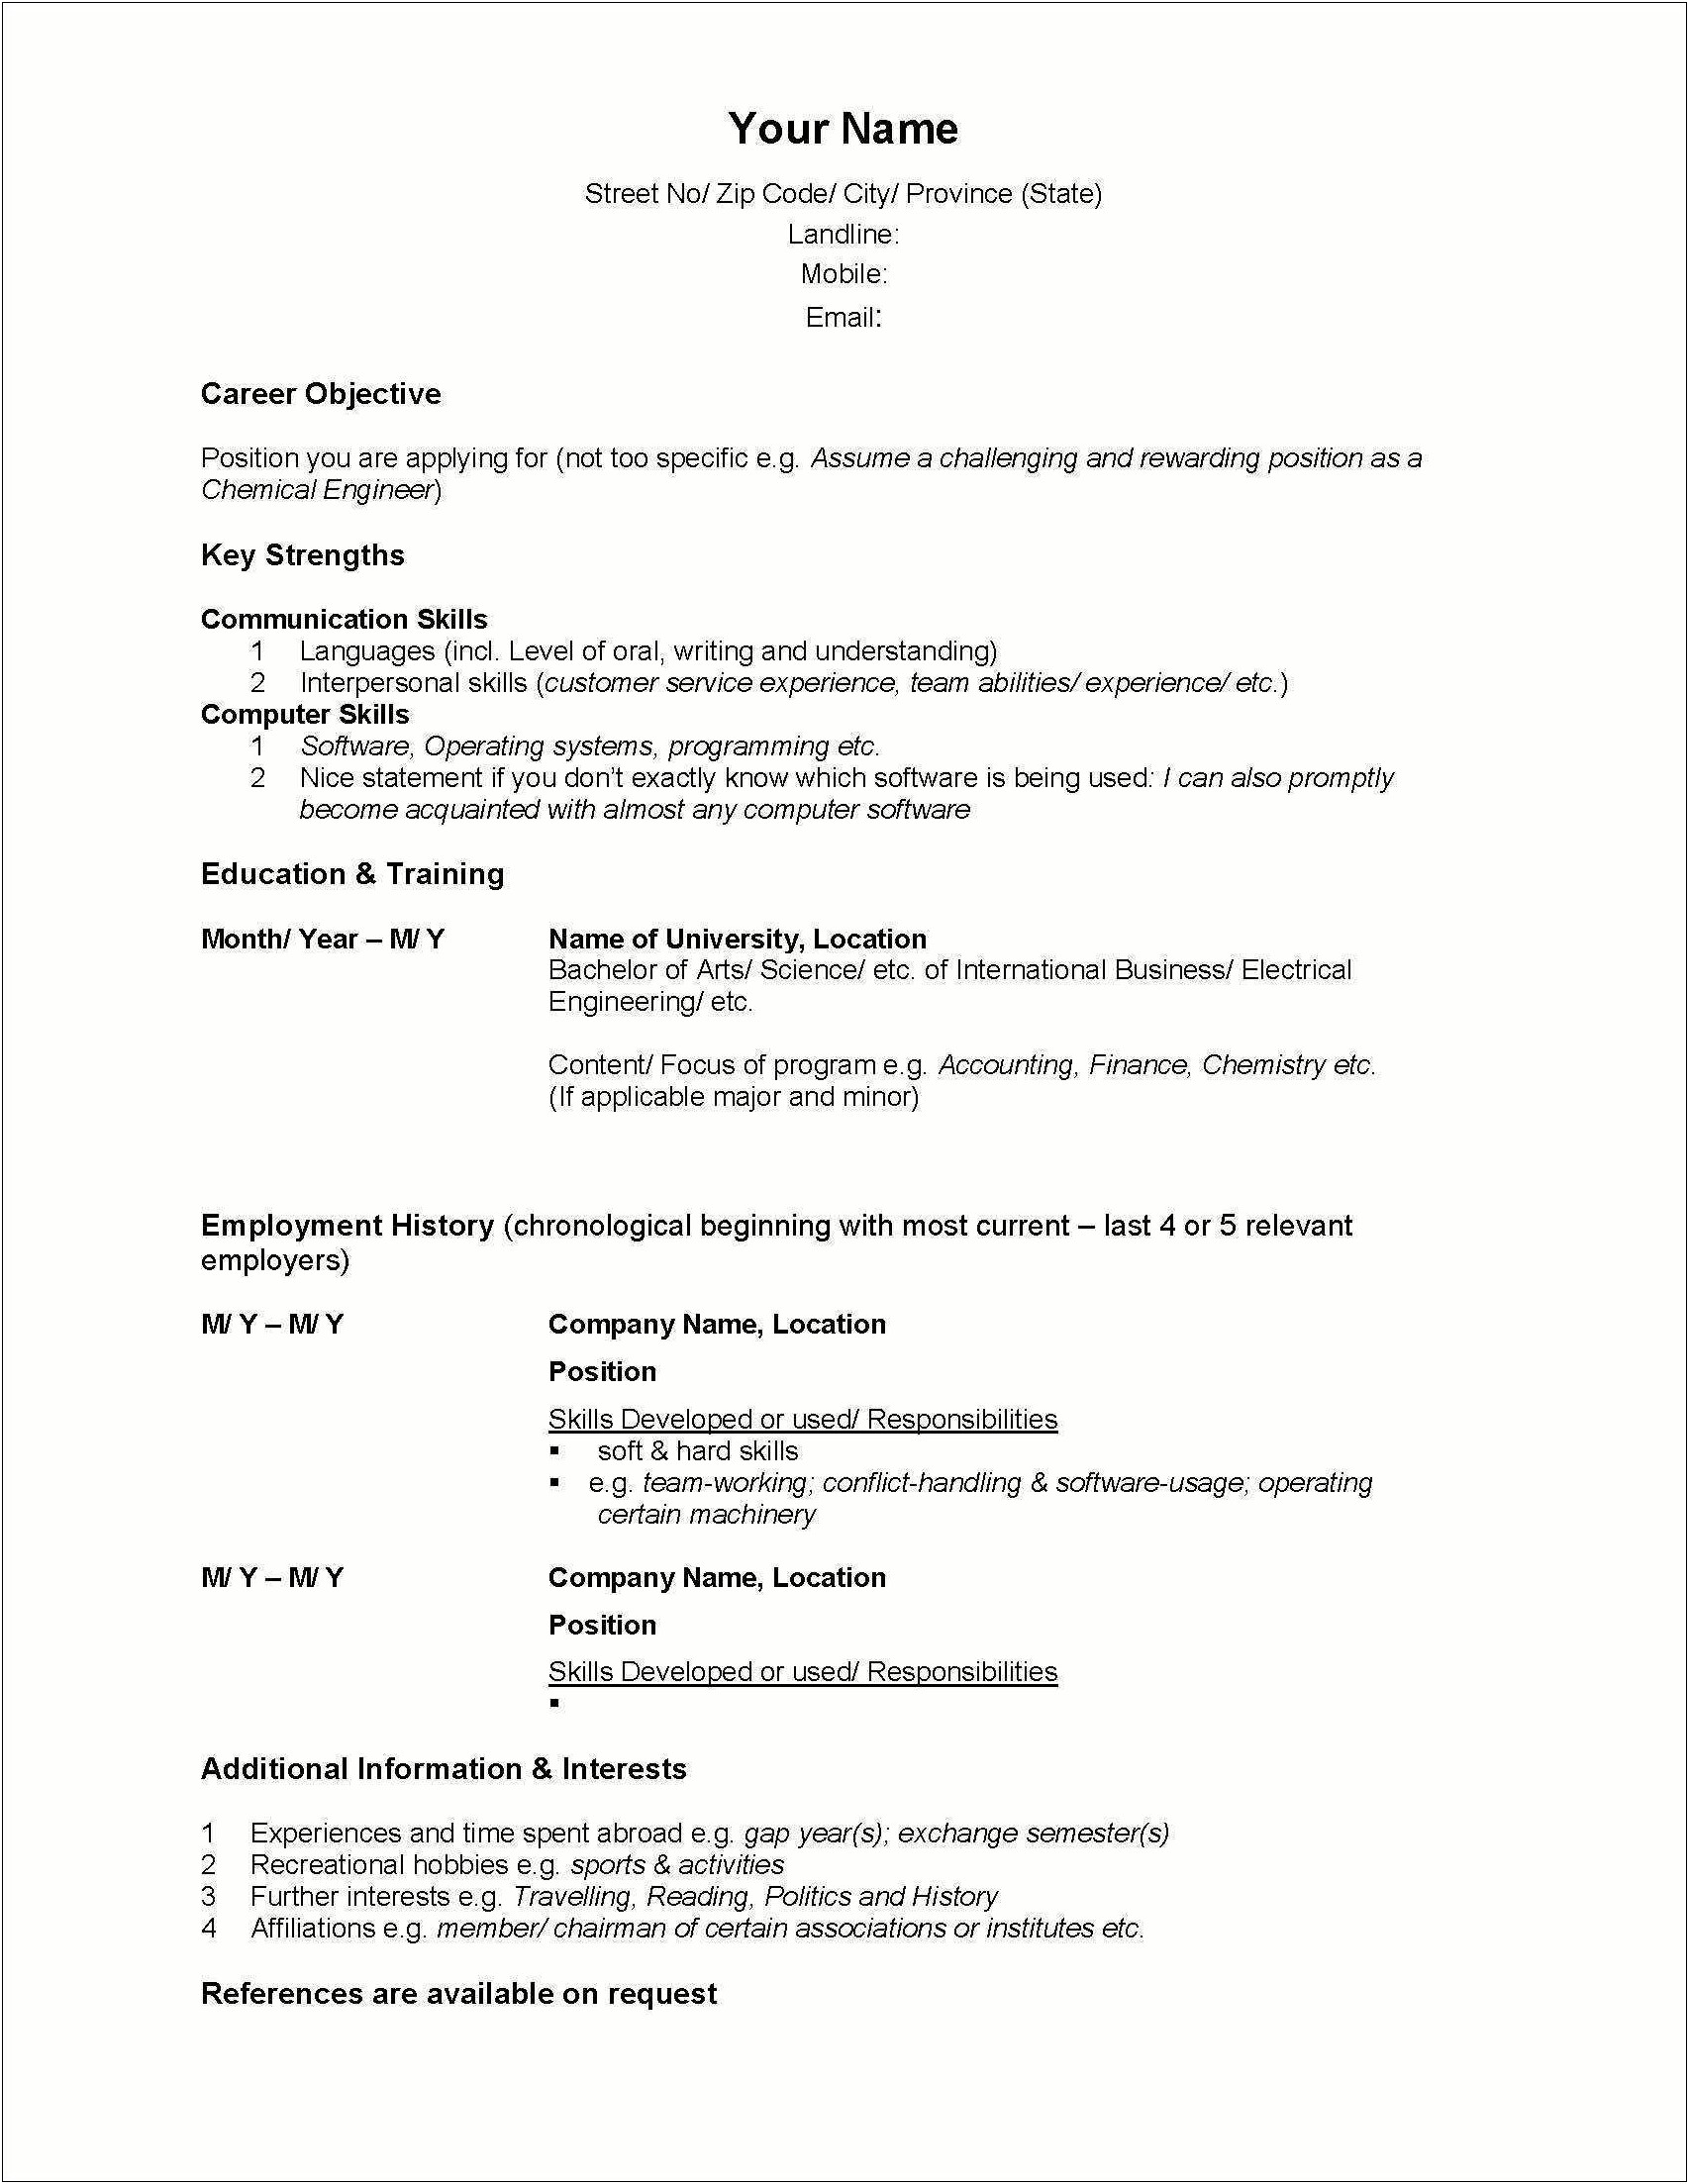 Good List Of Interests For A Resume